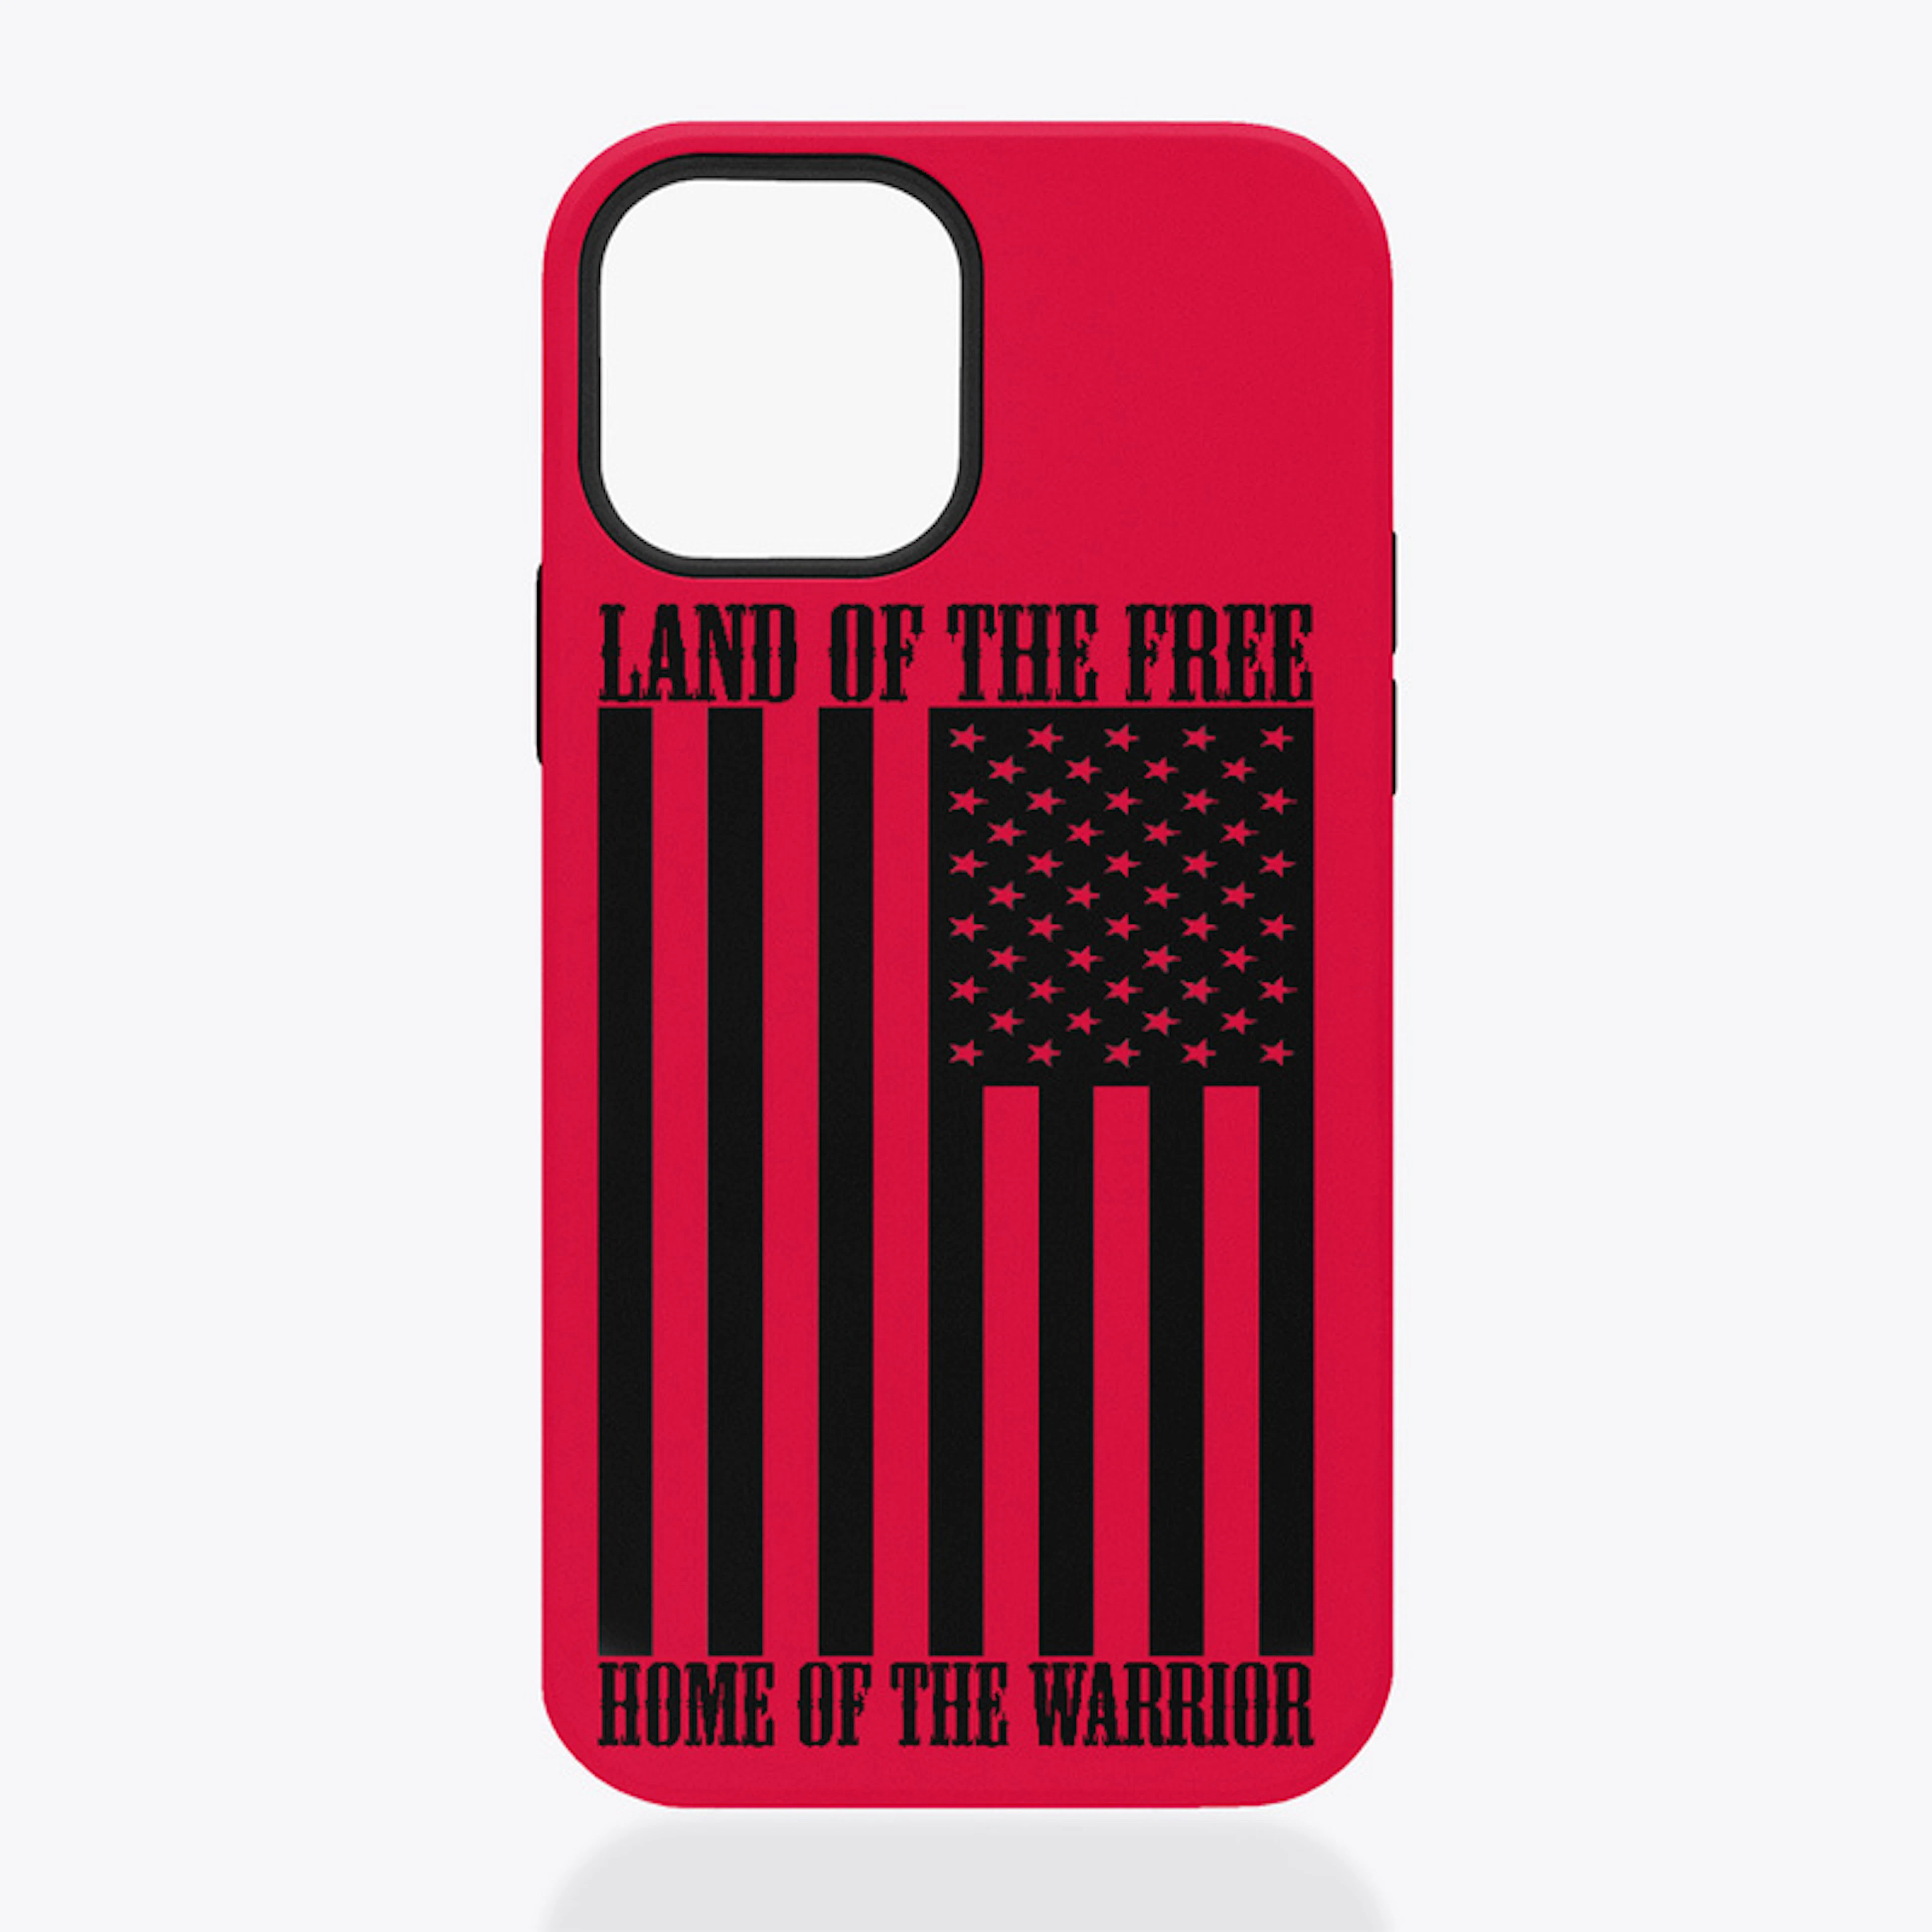 Home of the Warrior iPhone Case